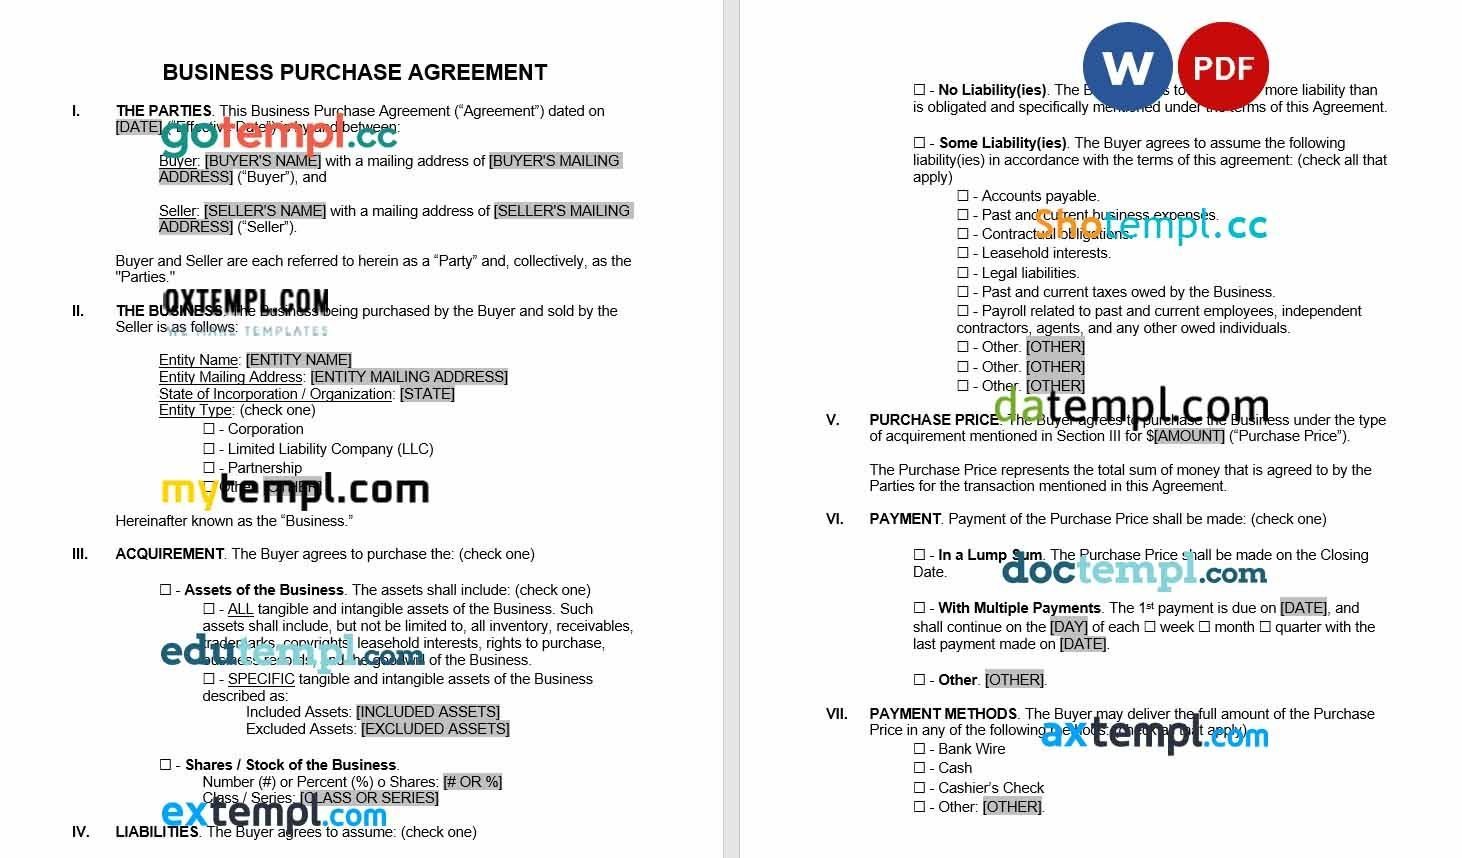 Business Purchase Agreement Word example, fully editable